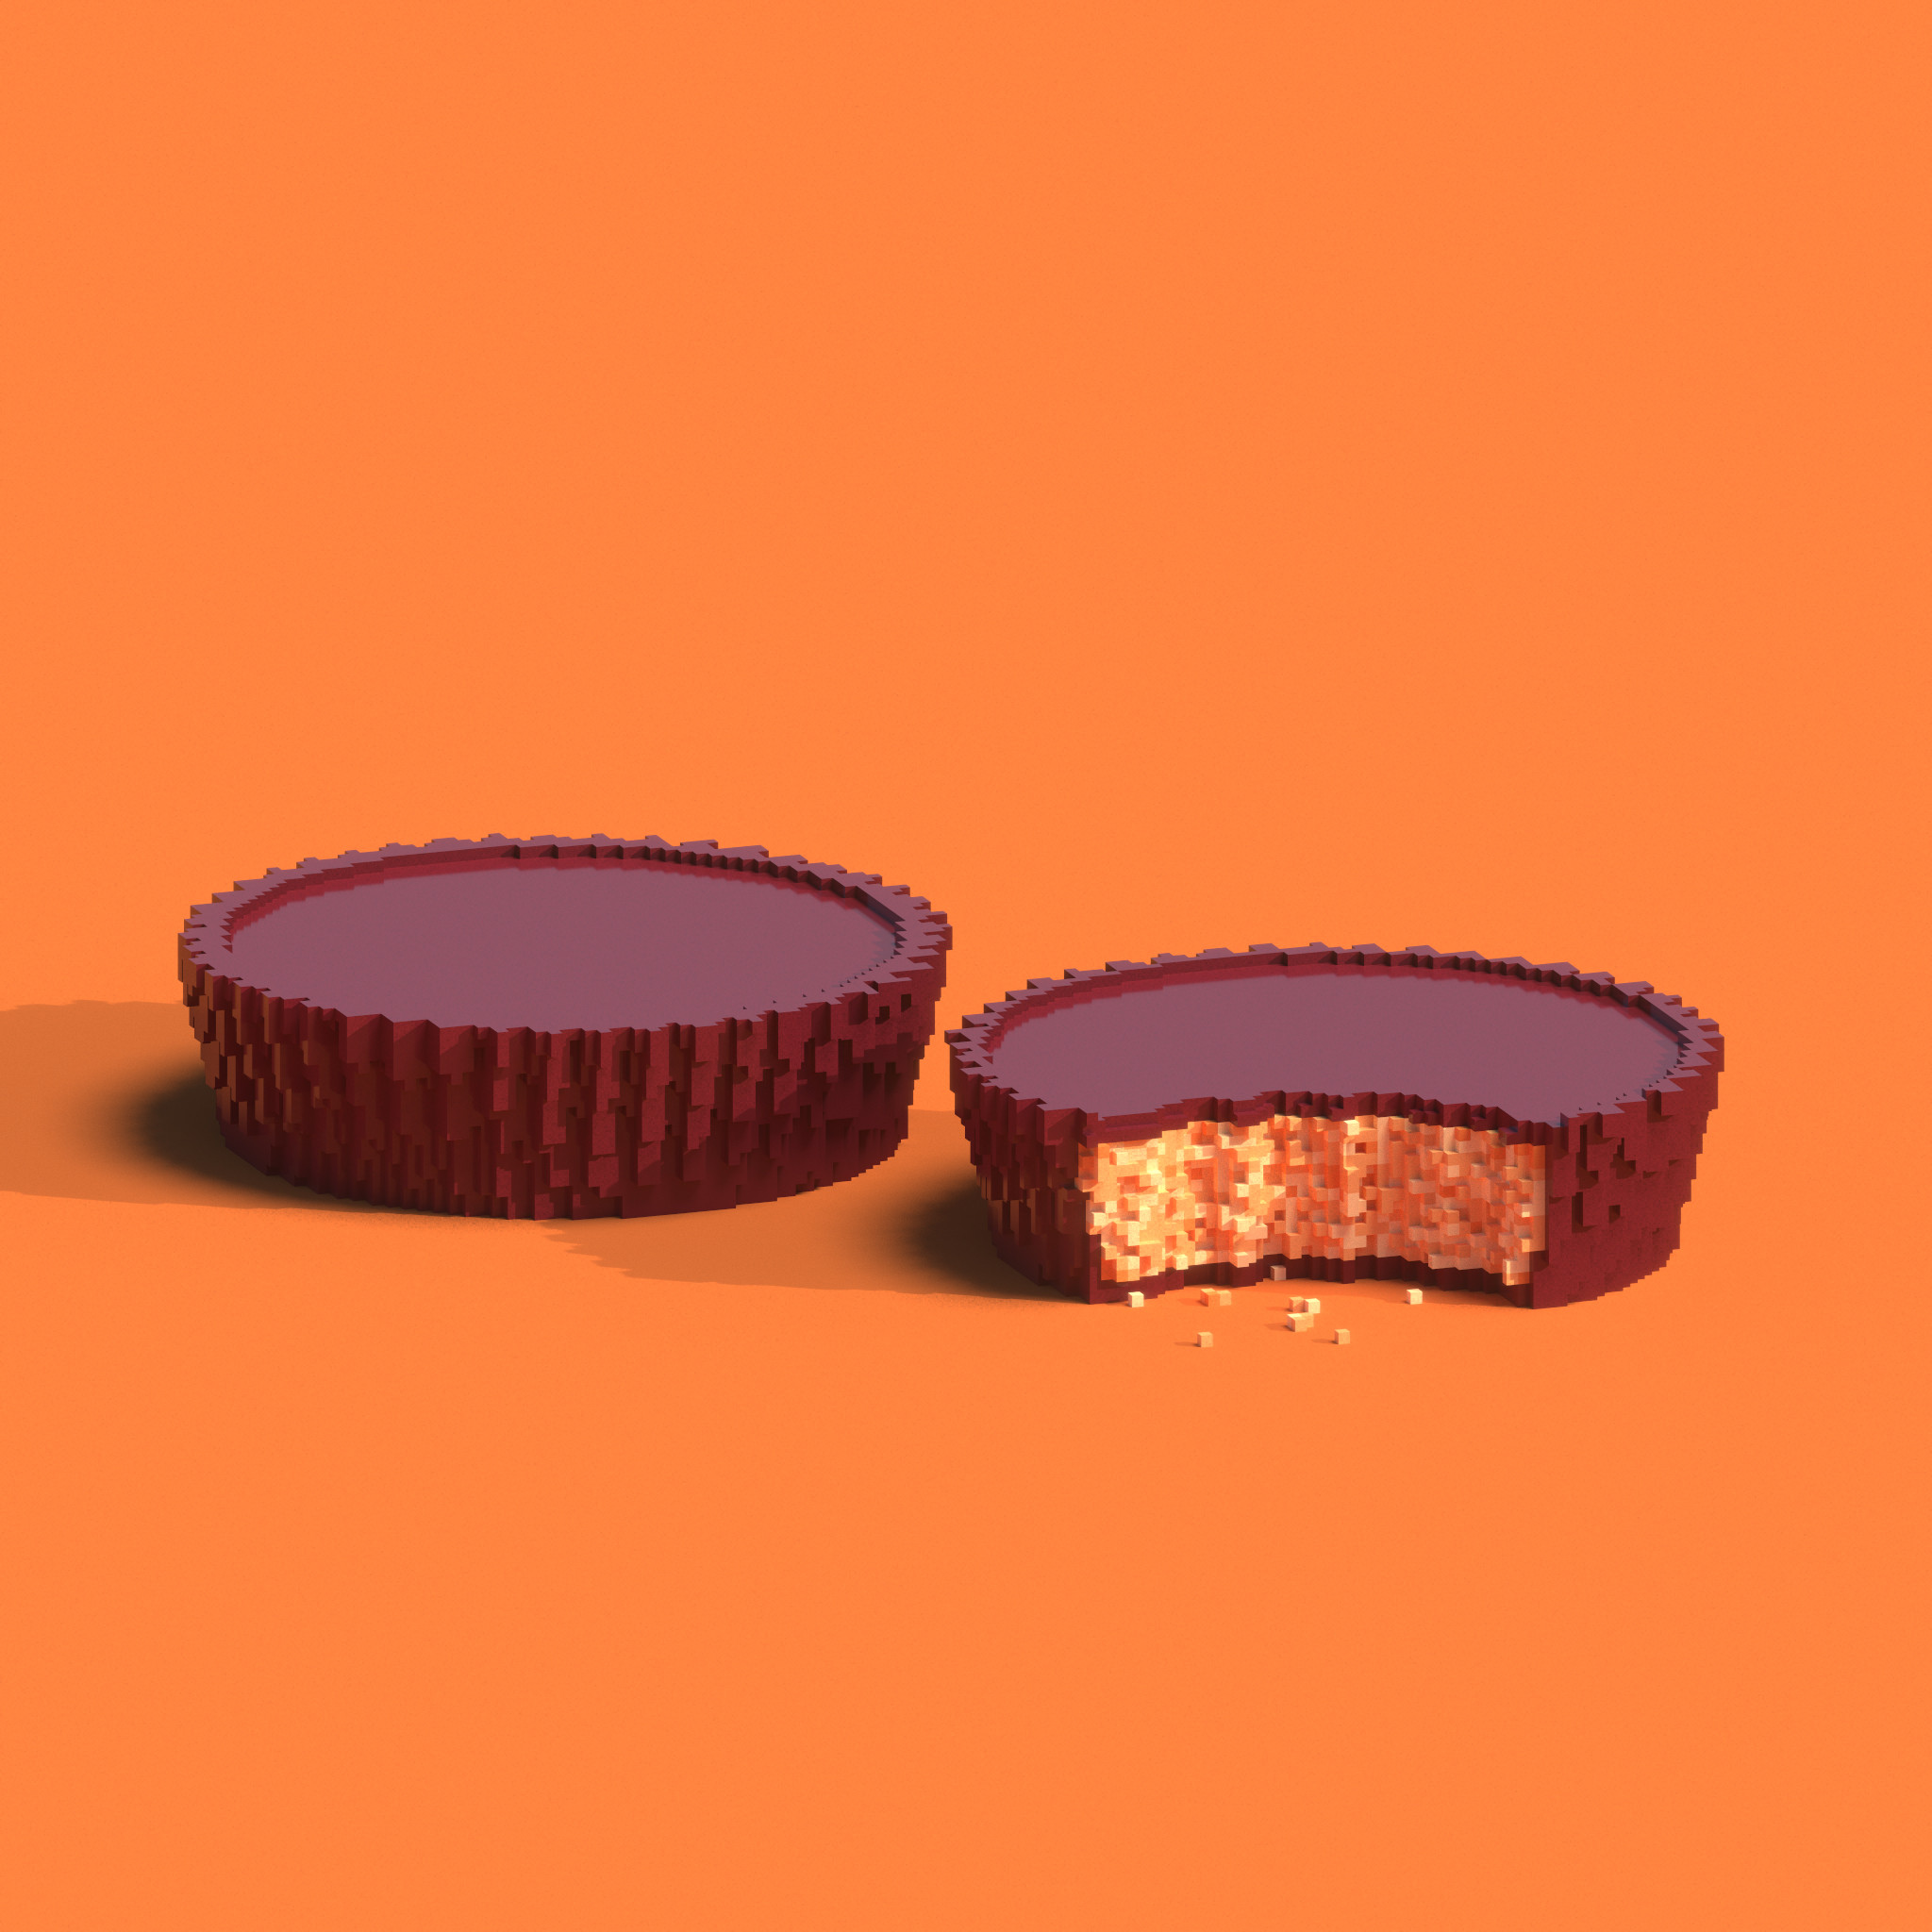 Reese's Milk Chocolate Peanut Butter Cups created and rendered using Magicavoxel.